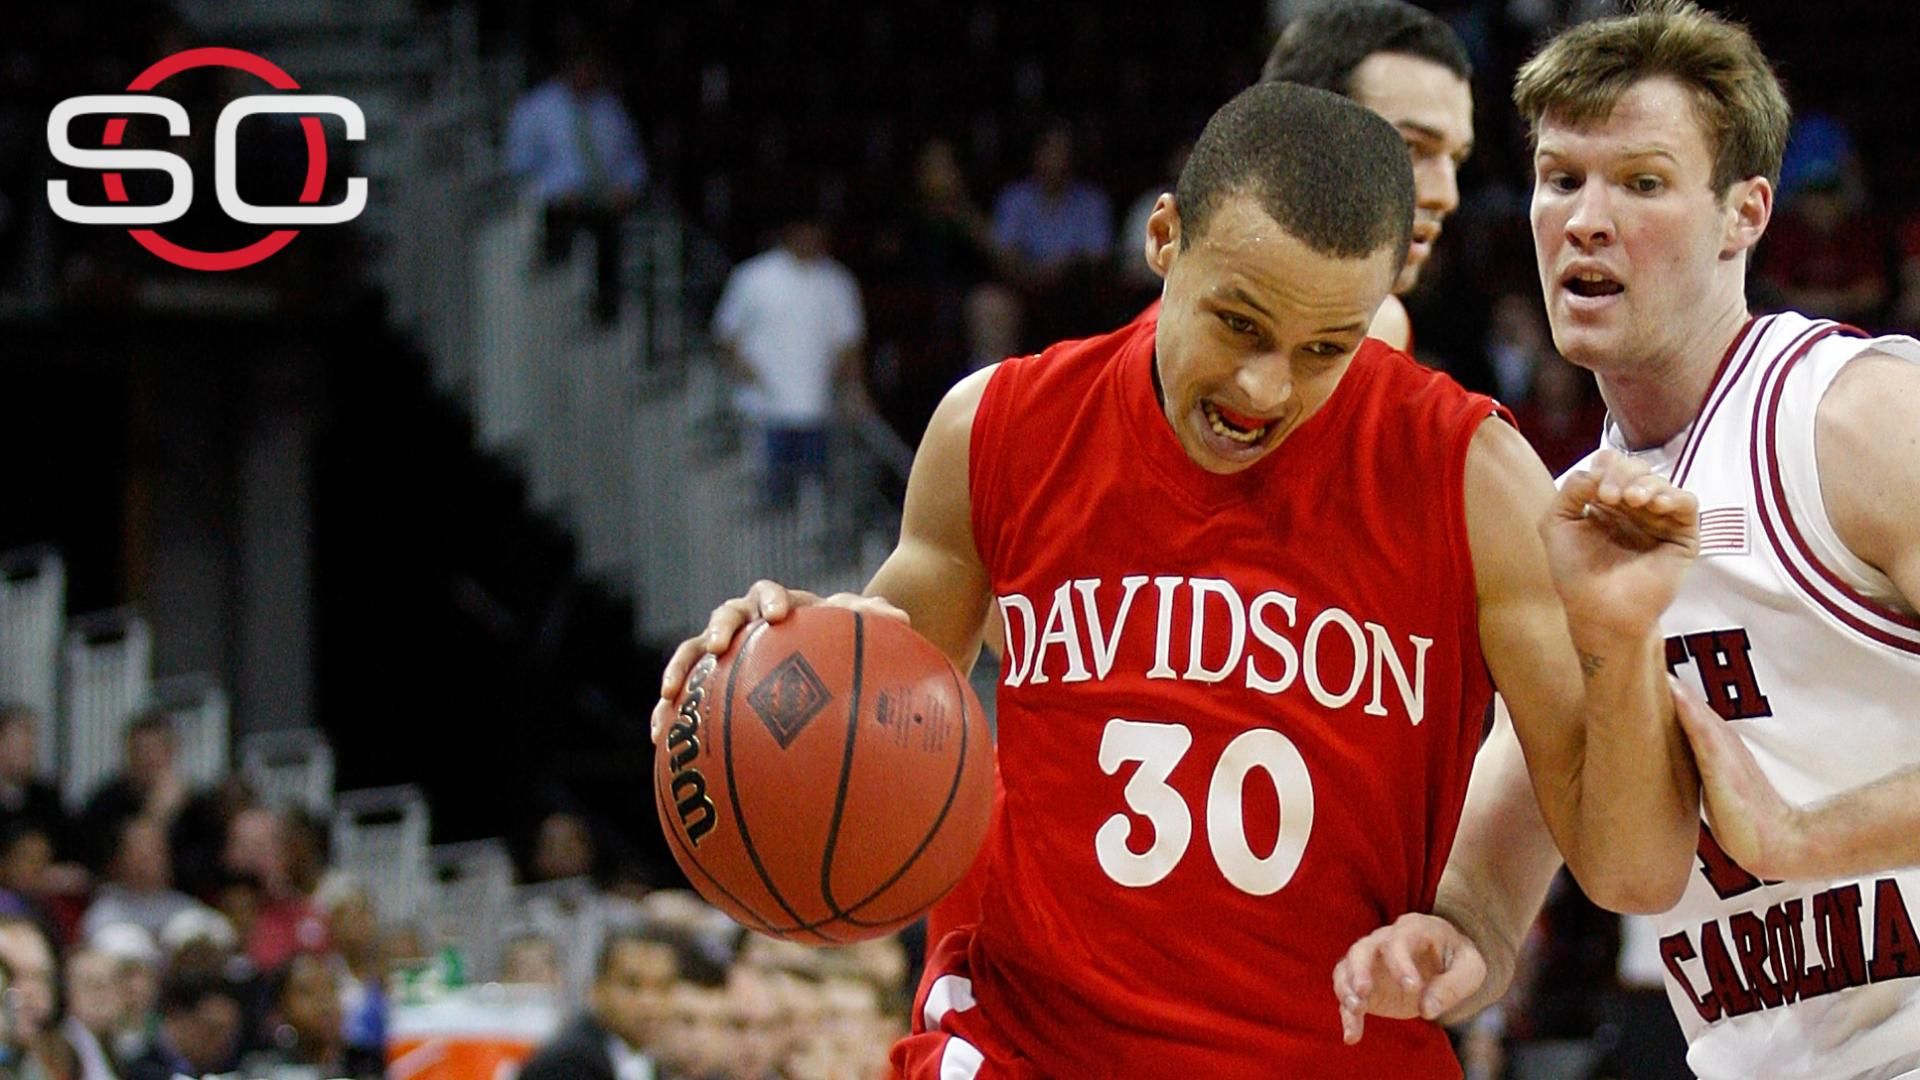 Davidson coach explains why Steph Curry's jersey hasn't been